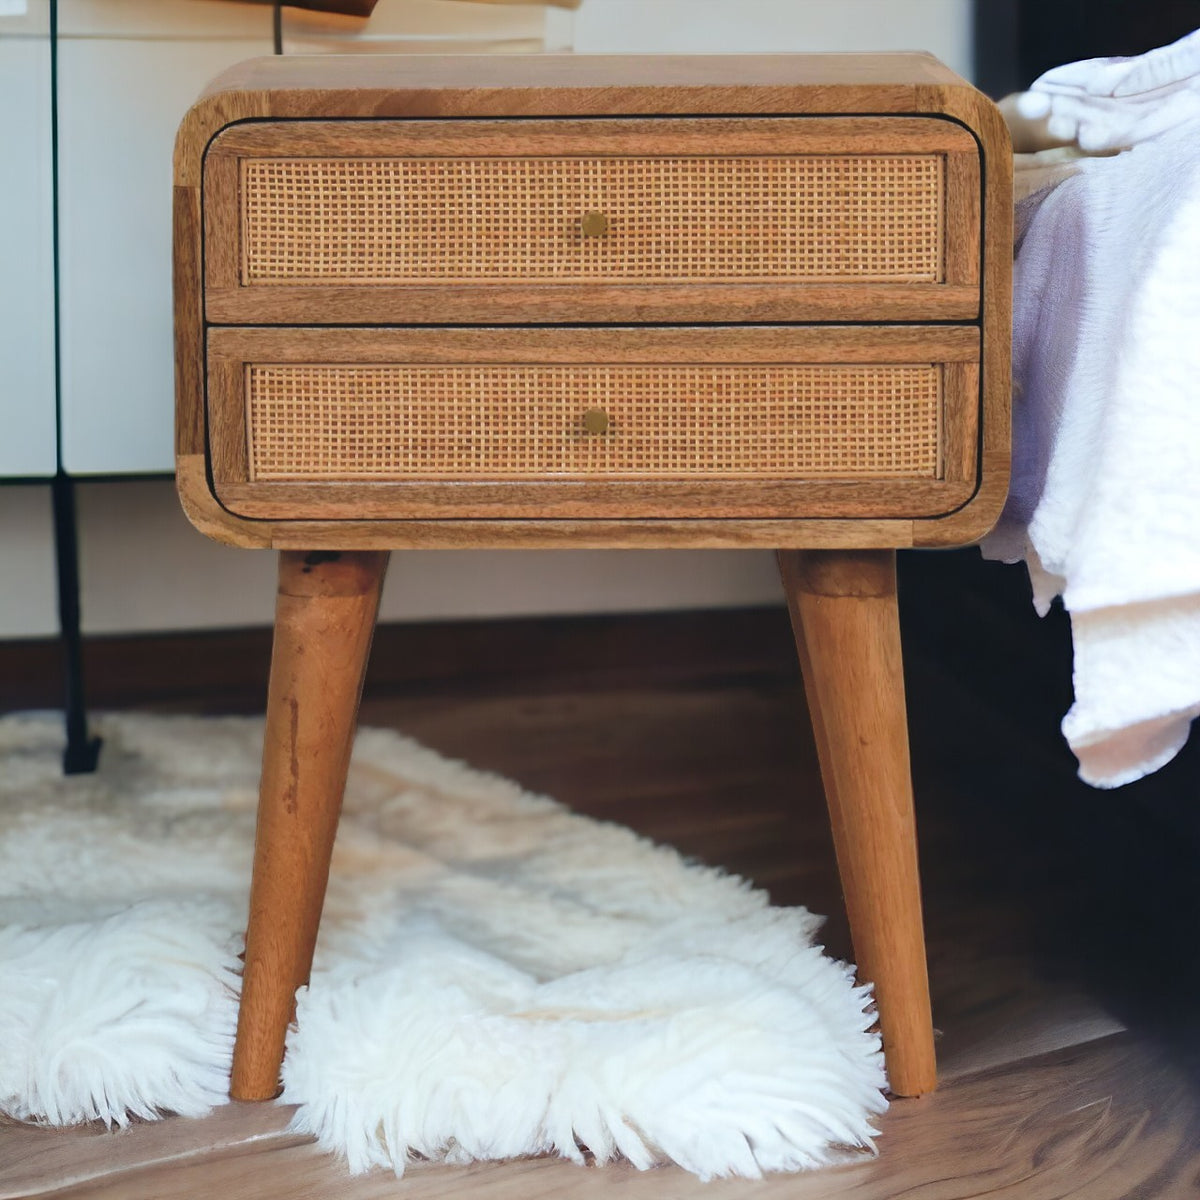 Woven Bedside Table with Drawers